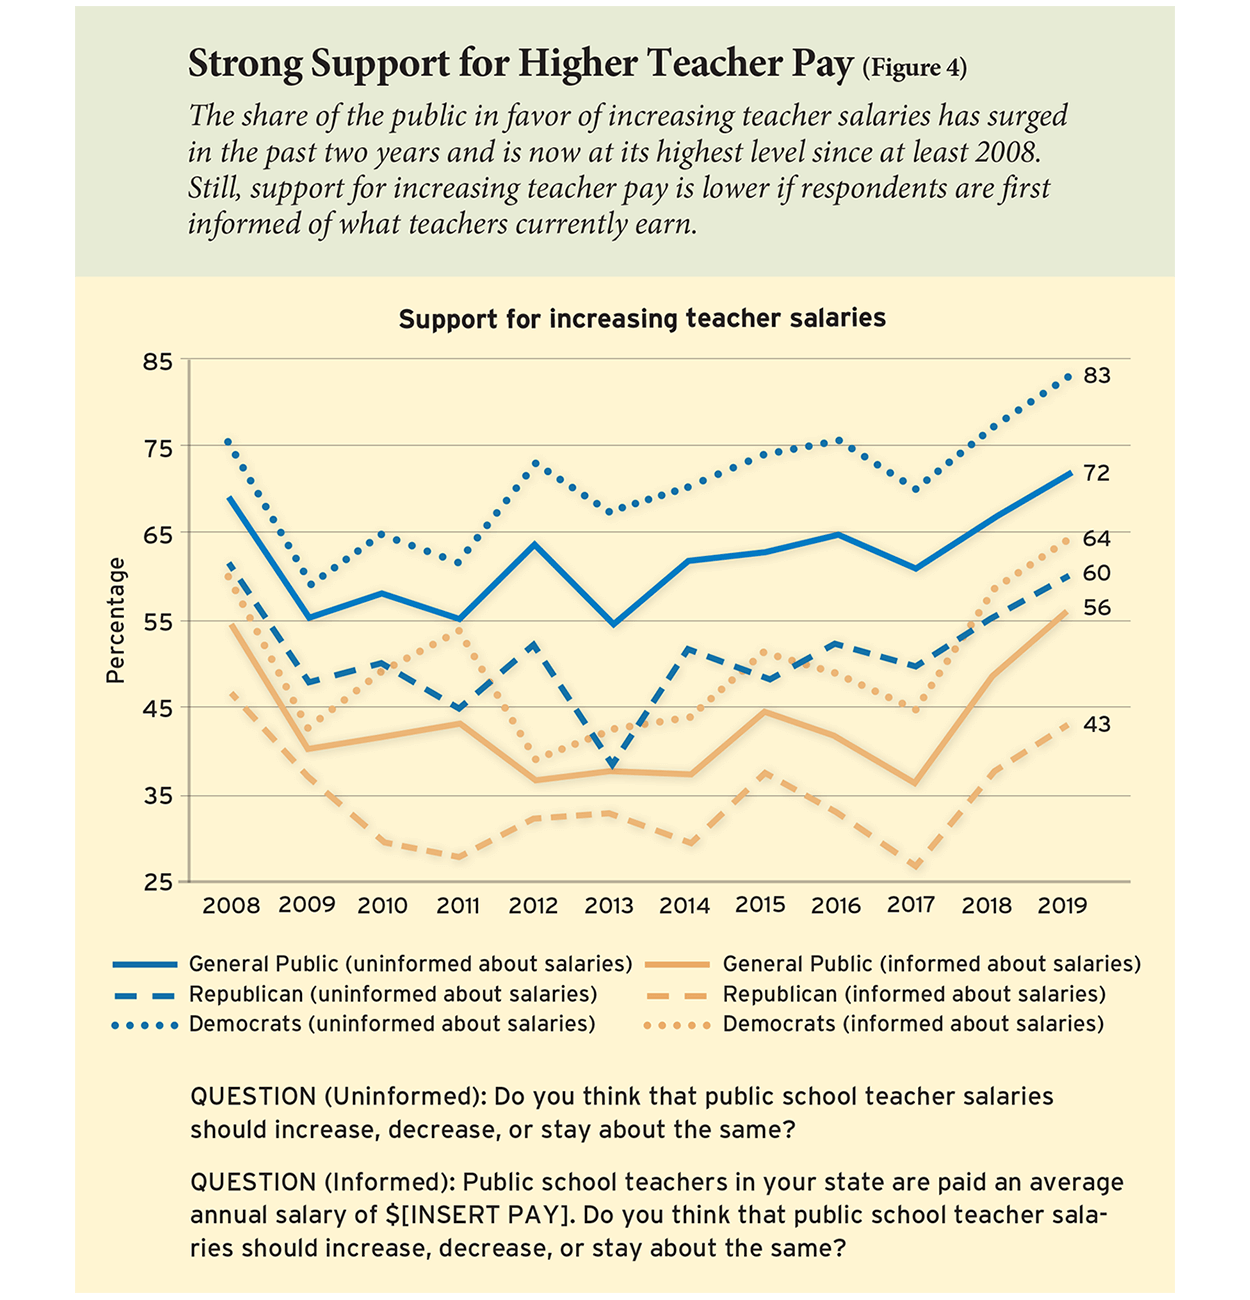 Strong Support for Higher Teacher Pay (Figure 4)